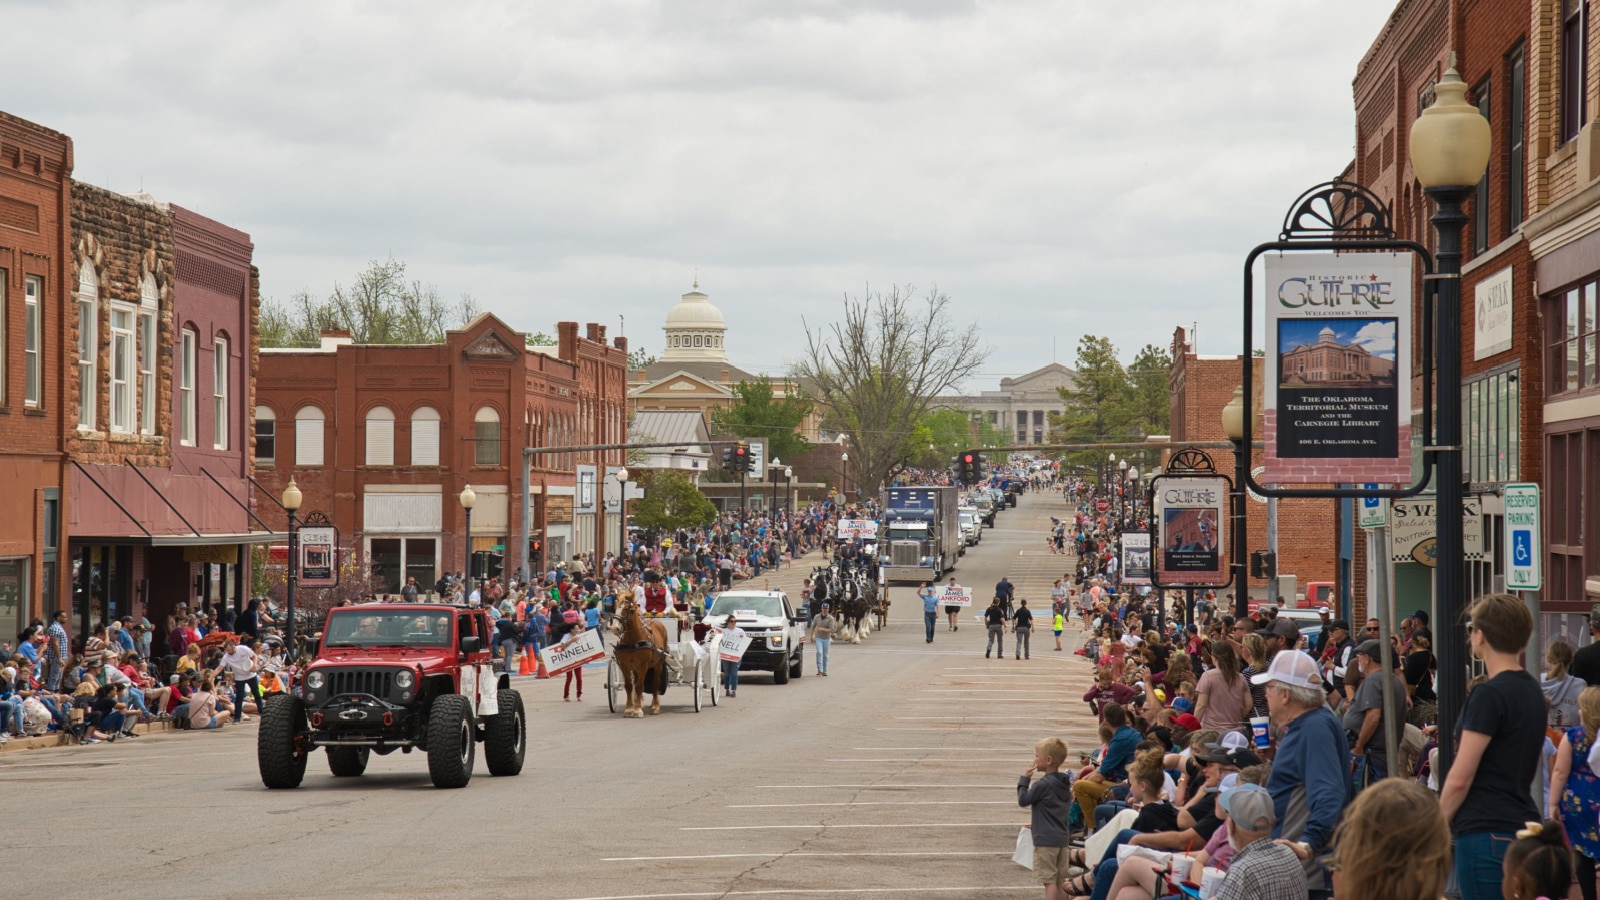 Guthrie, Oklahoma, USA - April 23 2022: EIGHTY-NINER DAY CELEBRATION PARADE, April event commemorating Oklahoma's first land run, in the former Capitol of OK